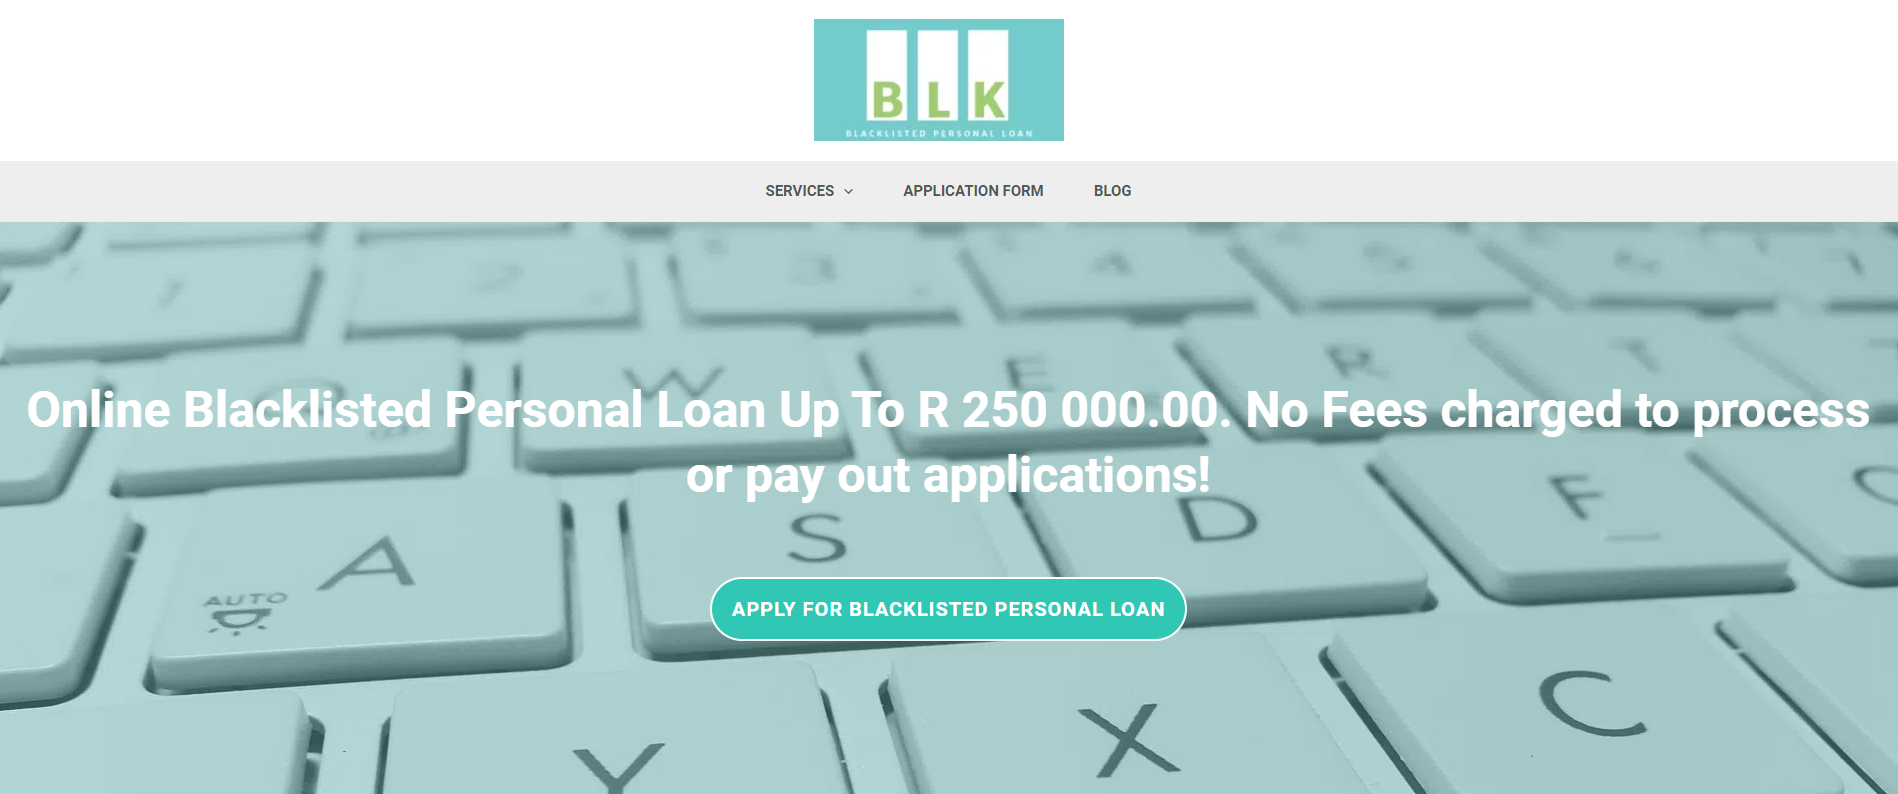 Blacklisted Personal Loan